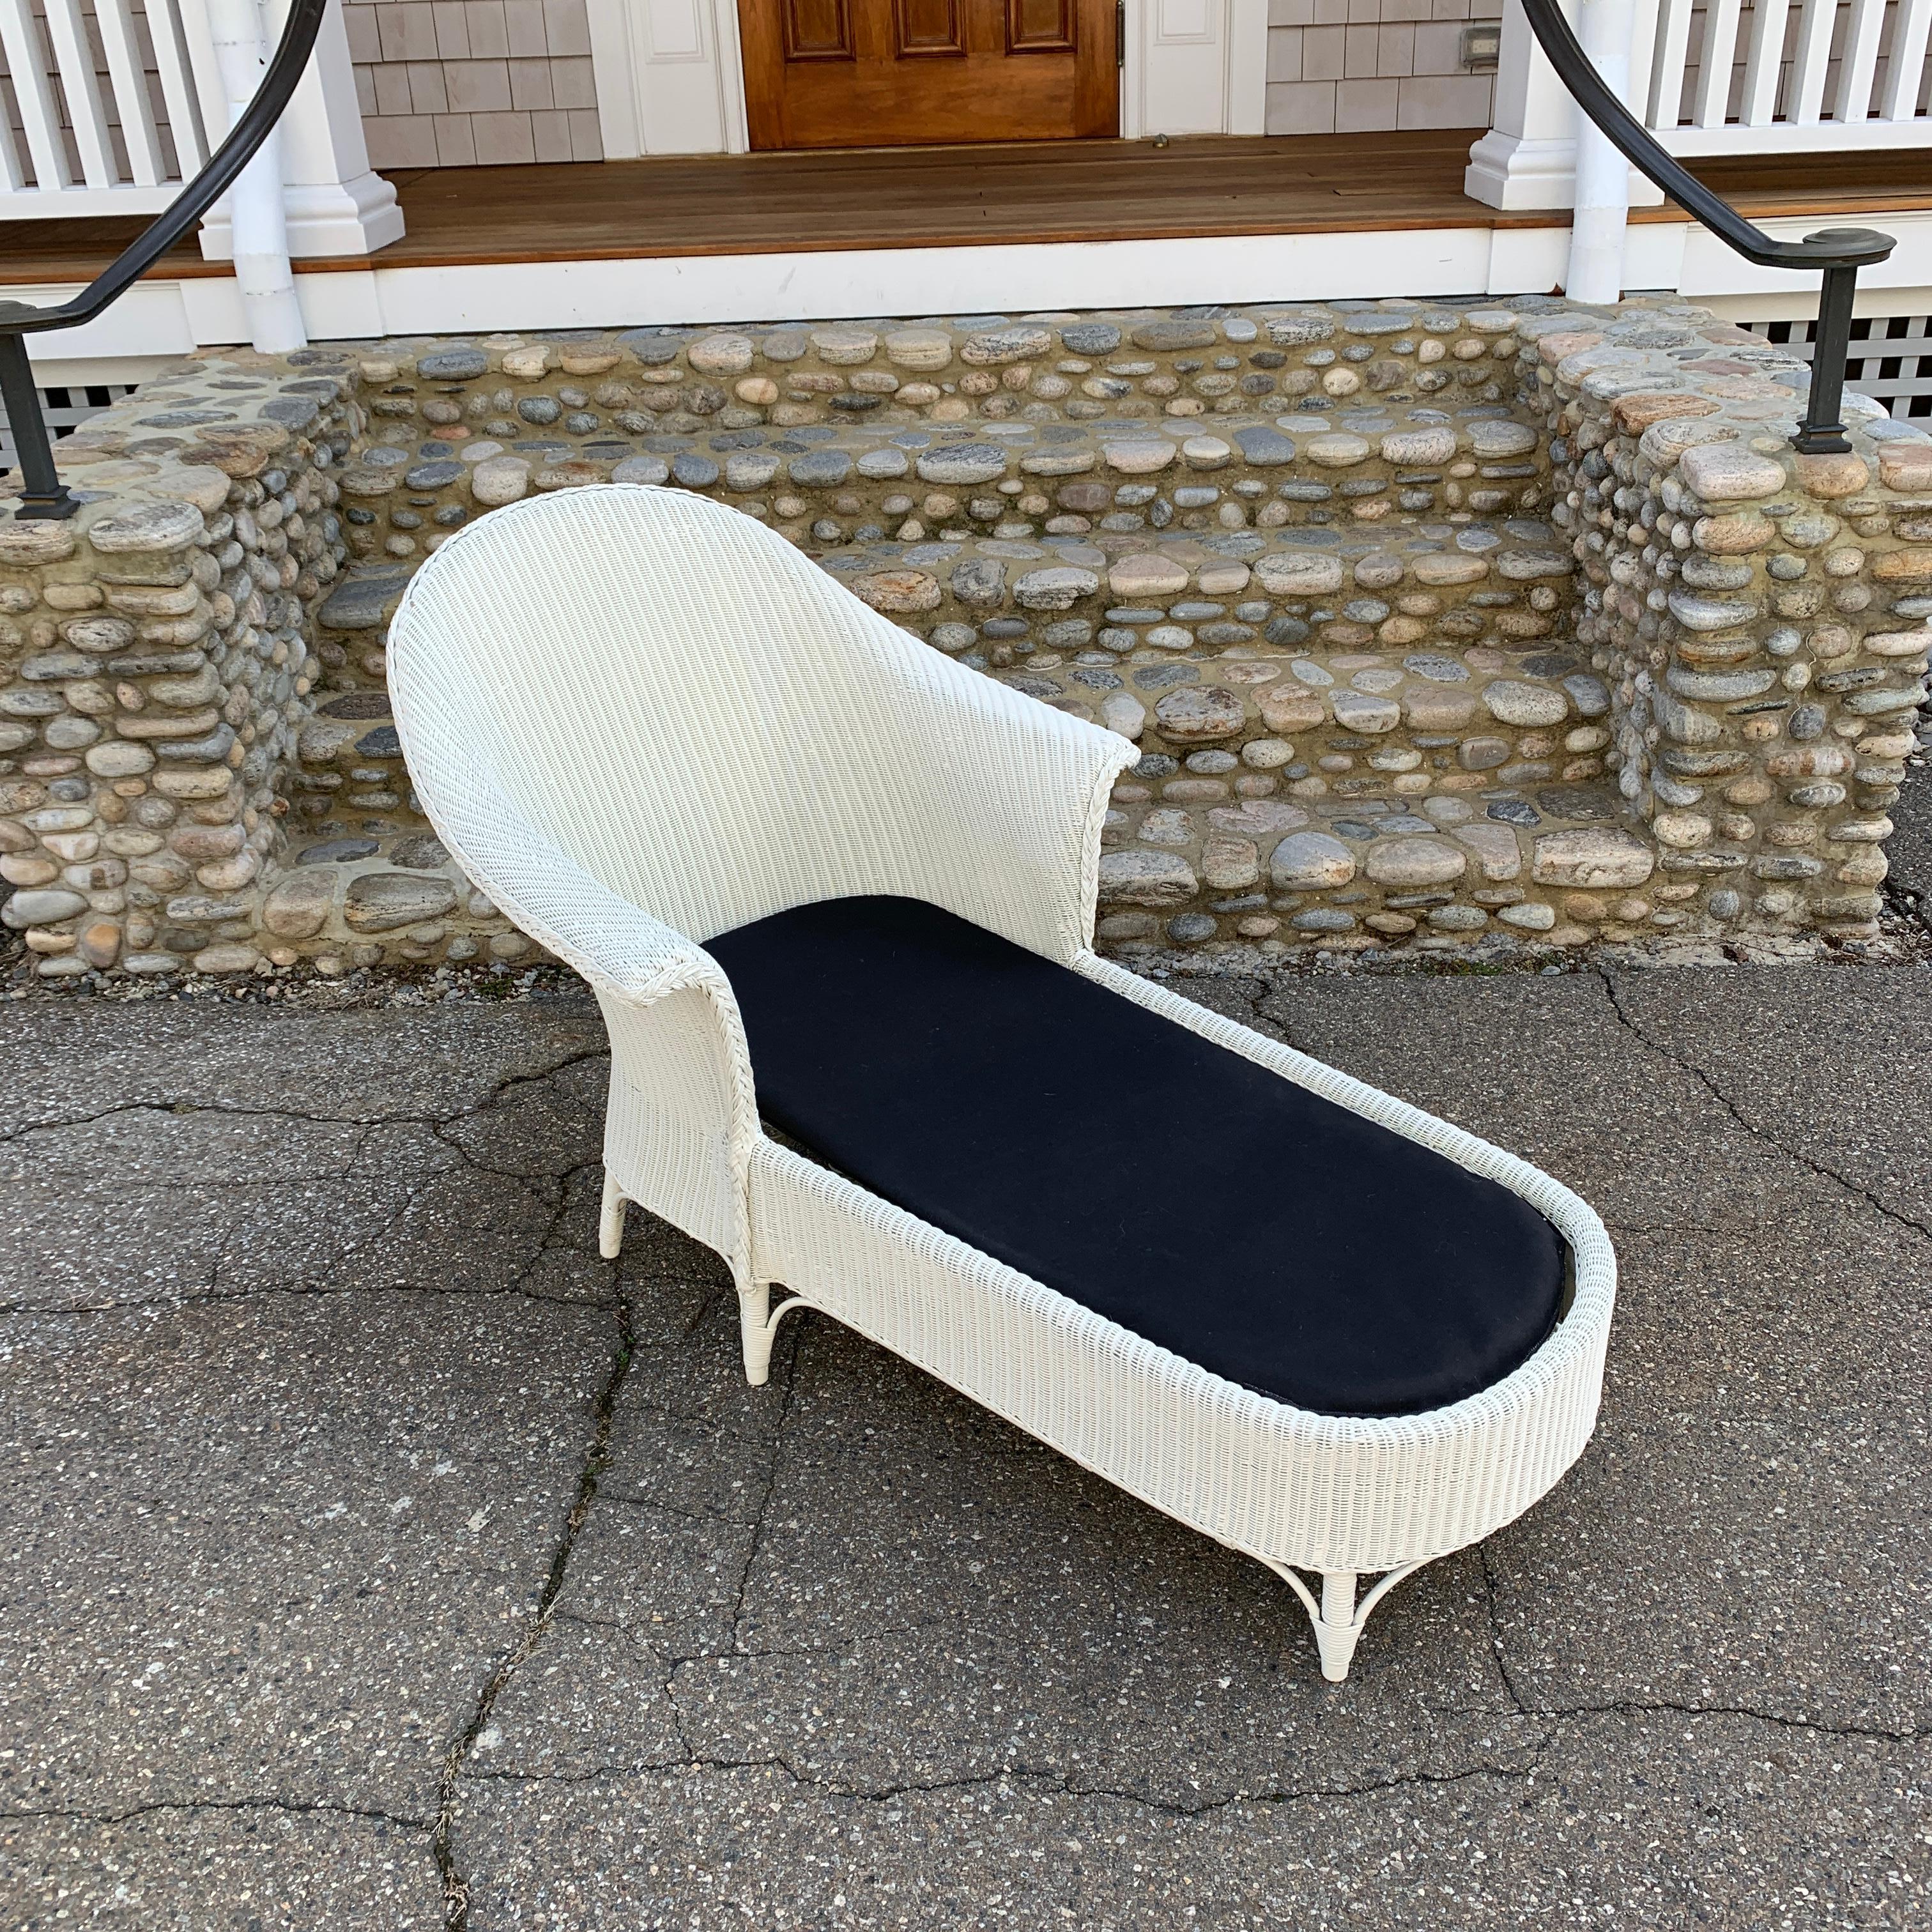 Antique Lloyd loom wicker chaise in white paint. Fabric decking covers a spring platform. Paint has blended in some areas but piece is sound, sturdy and comfortable.